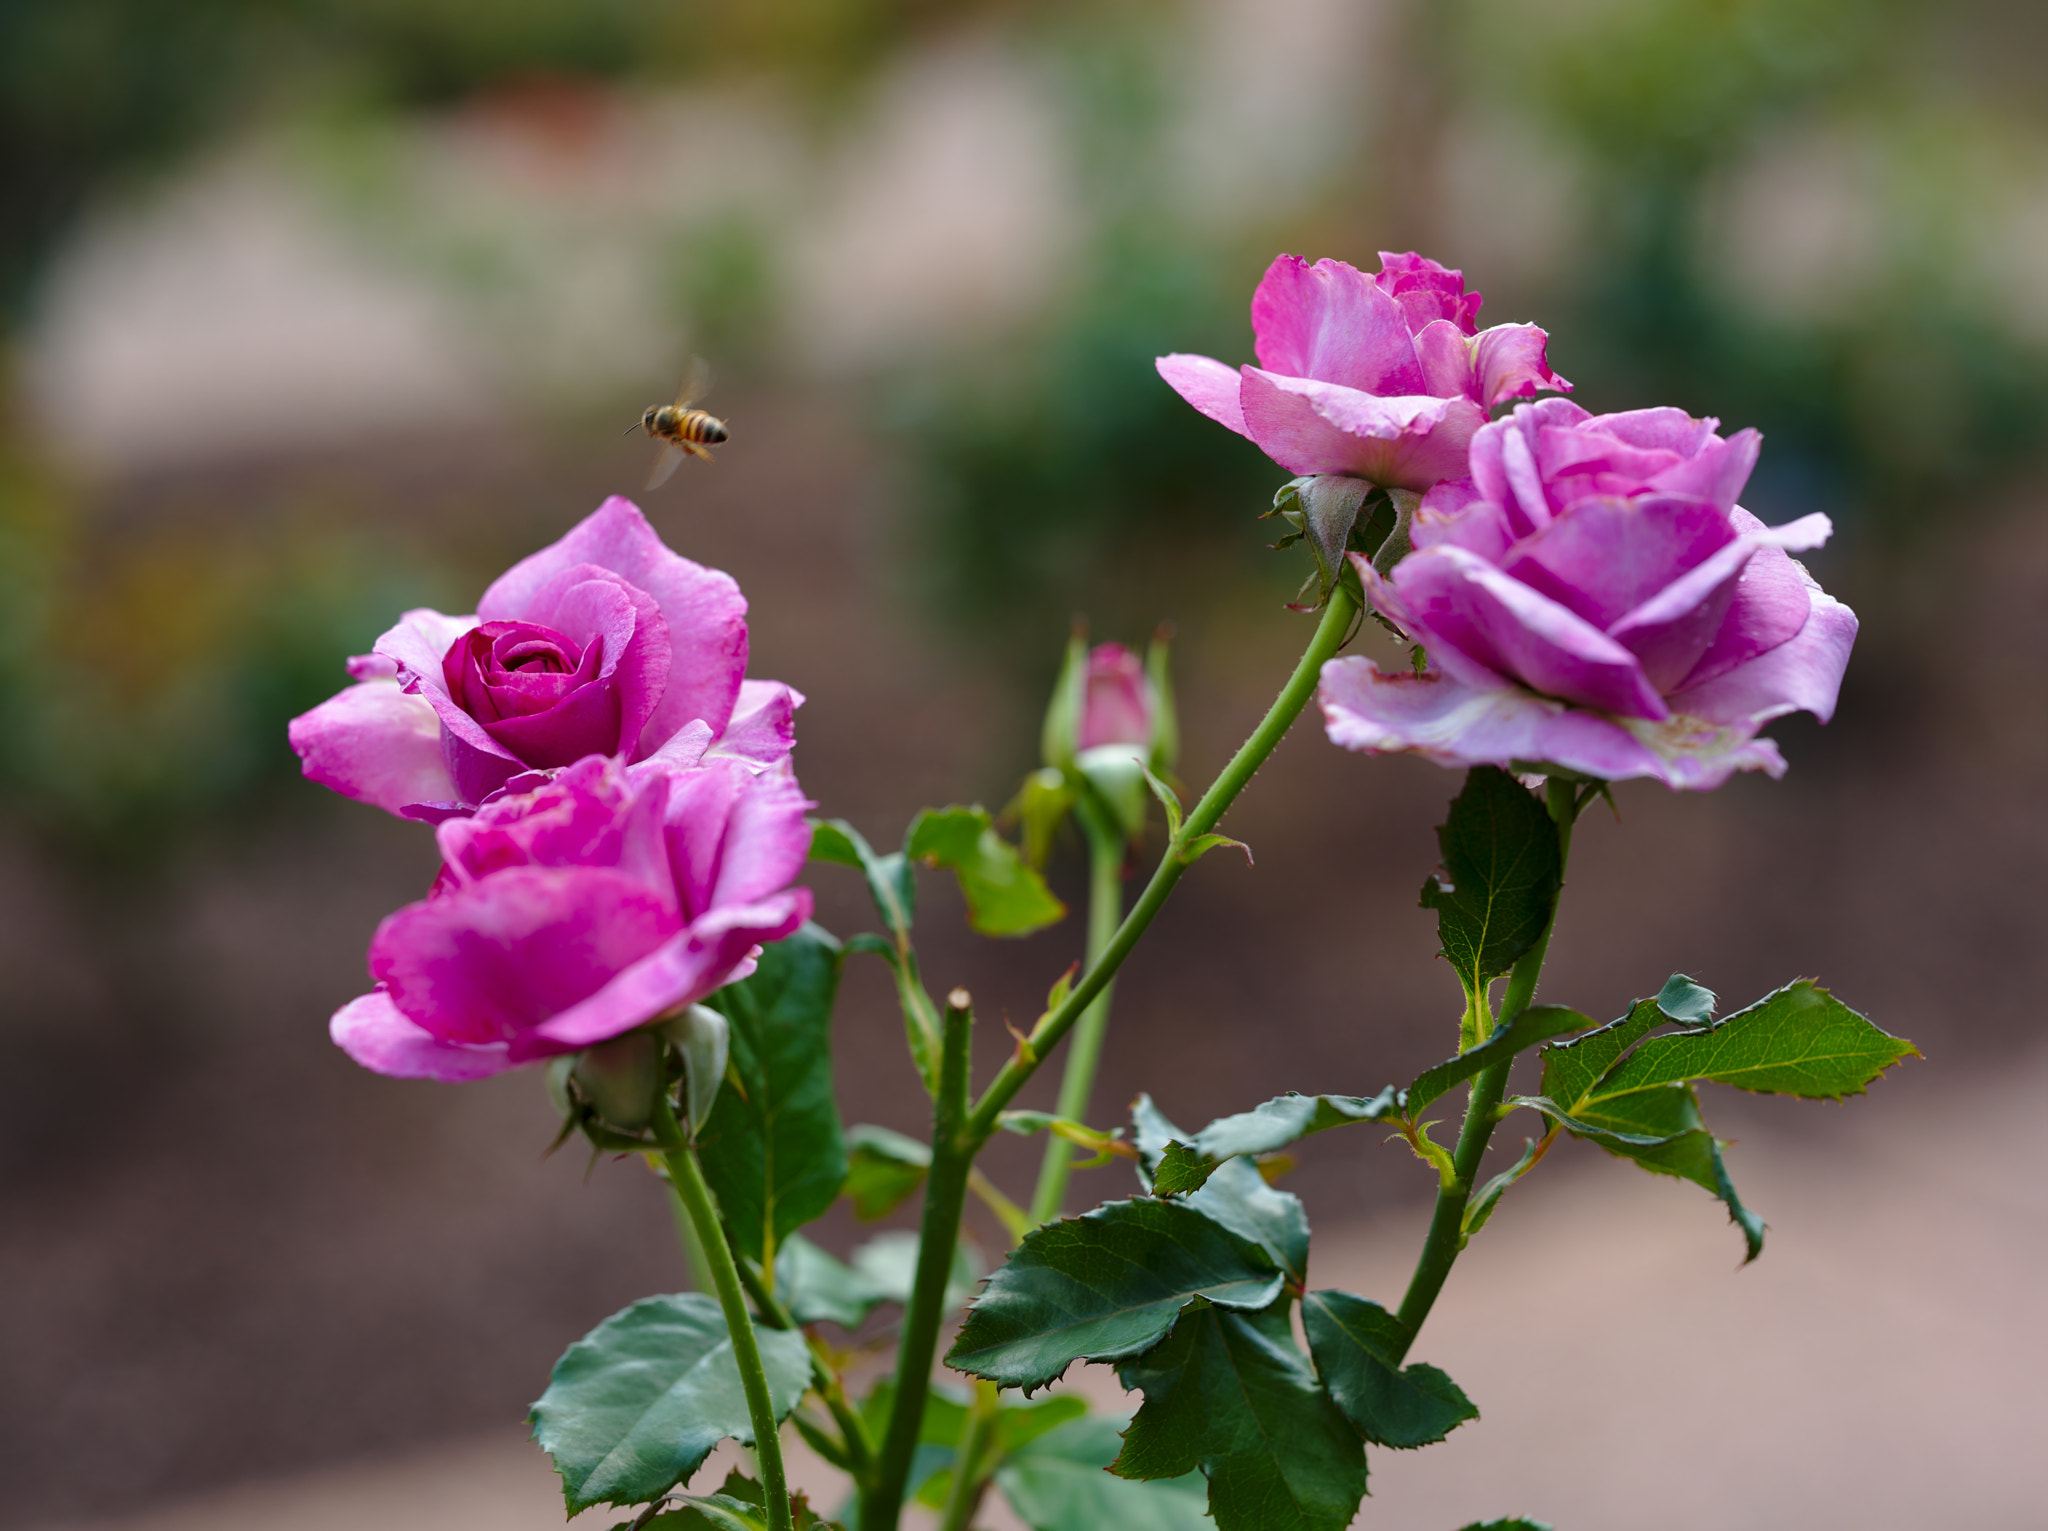 ZEISS Otus 85mm F1.4 sample photo. A quartet of pink roses photography